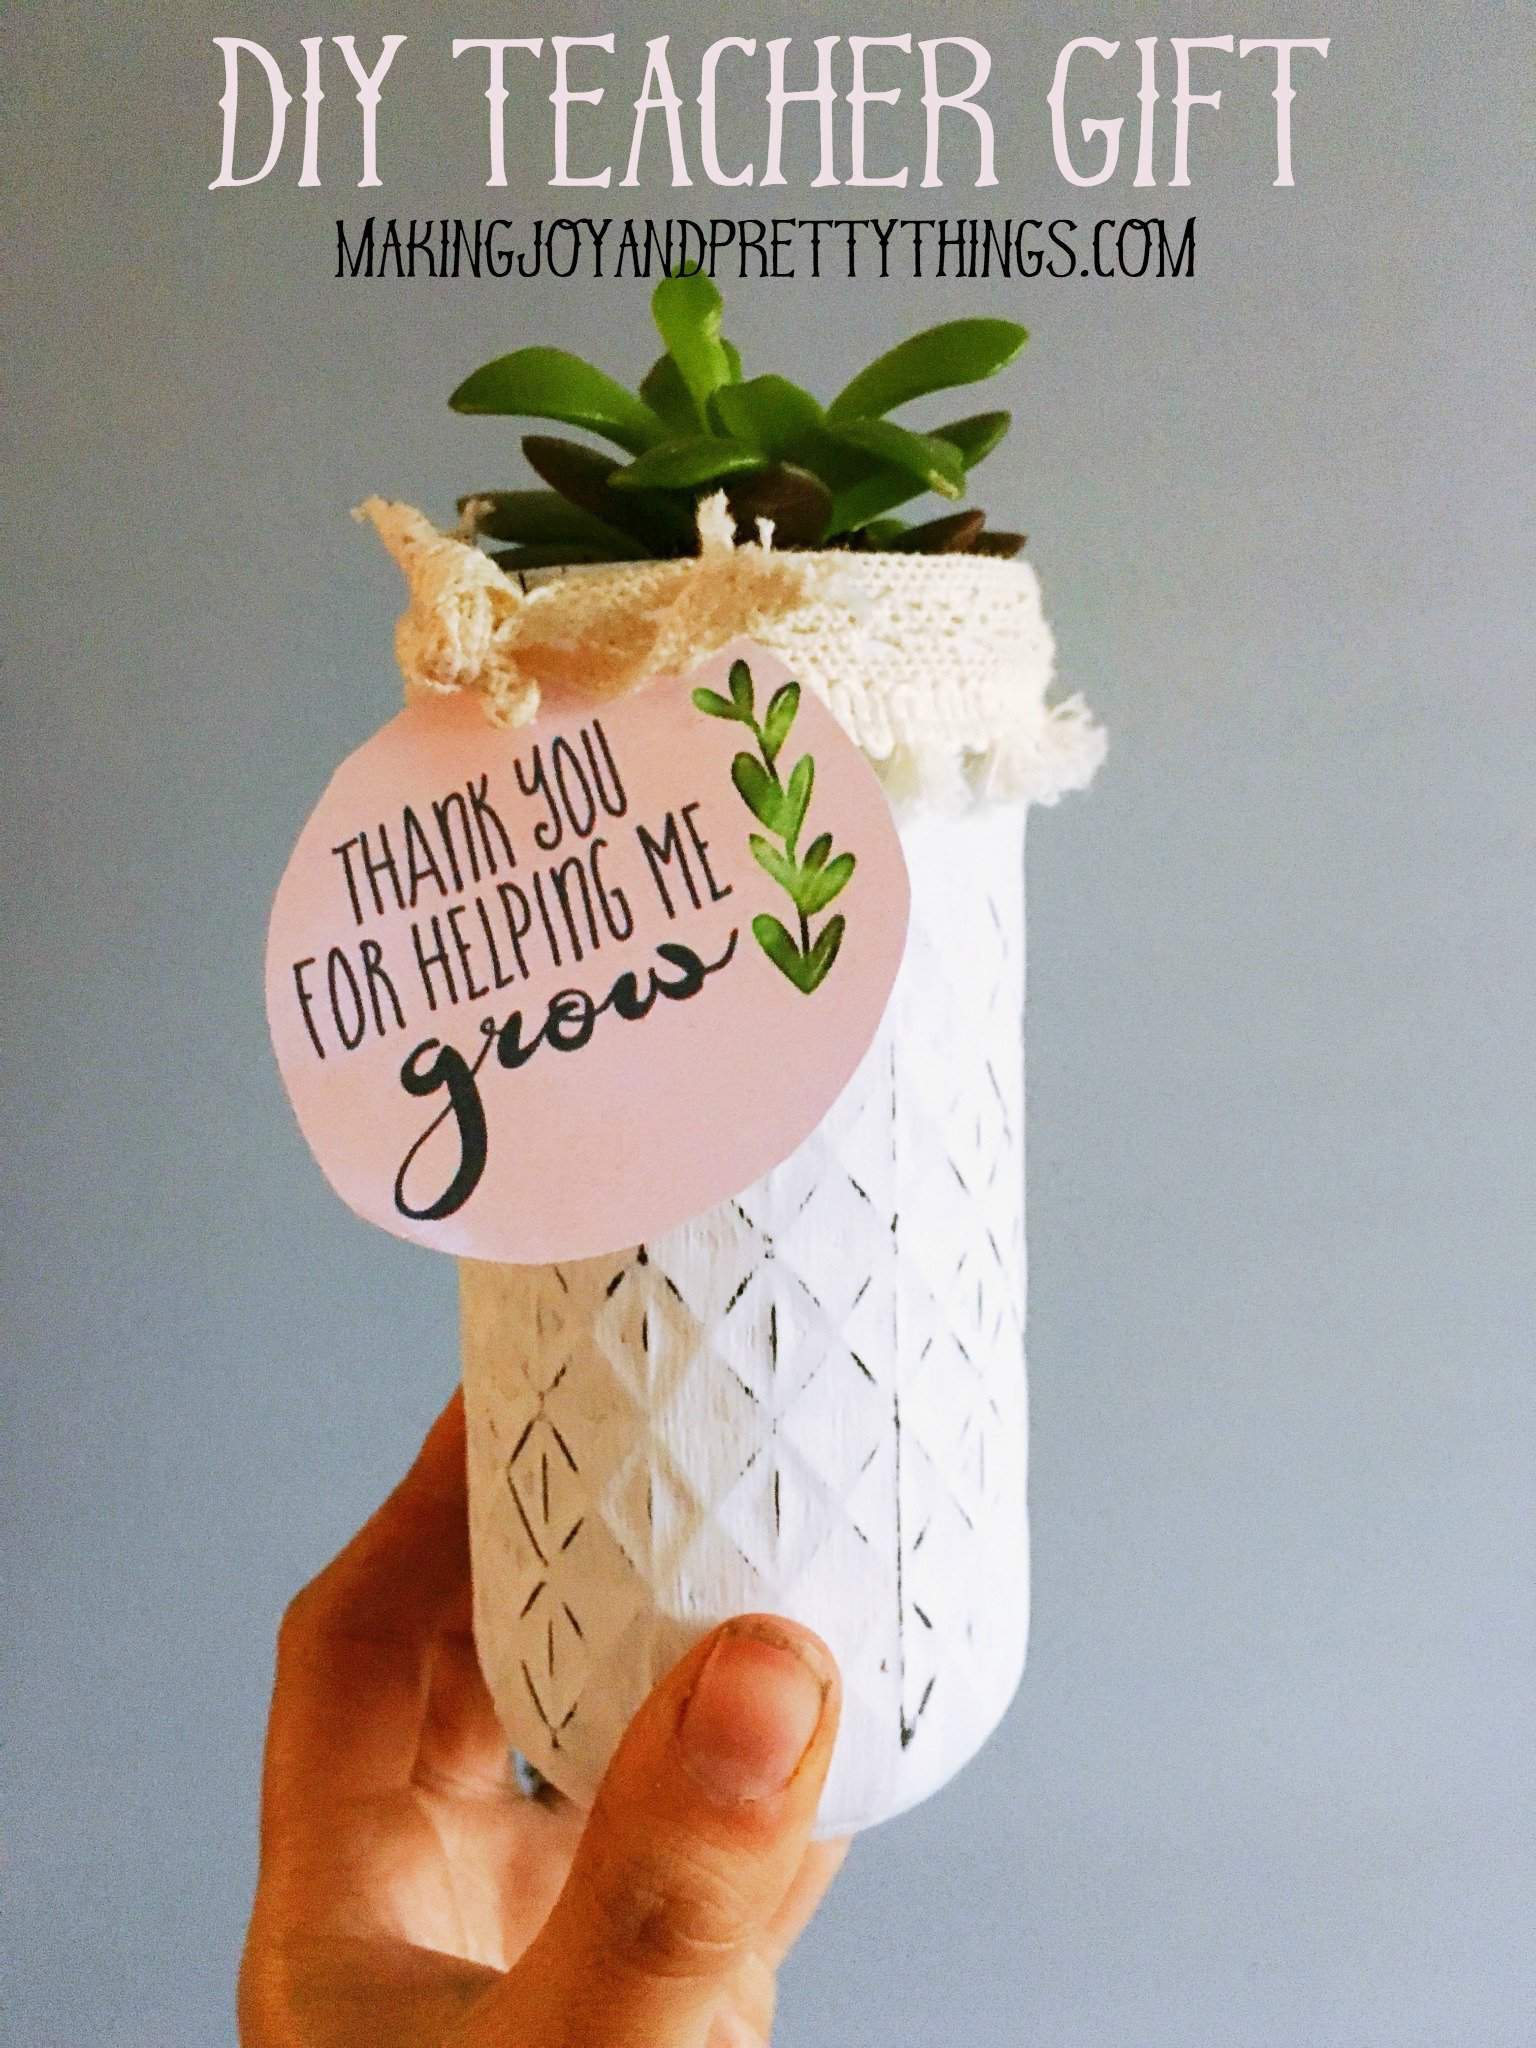 Details about   DIY Teacher Gift Foiled Sticker Label Thanks for helping me grow! 